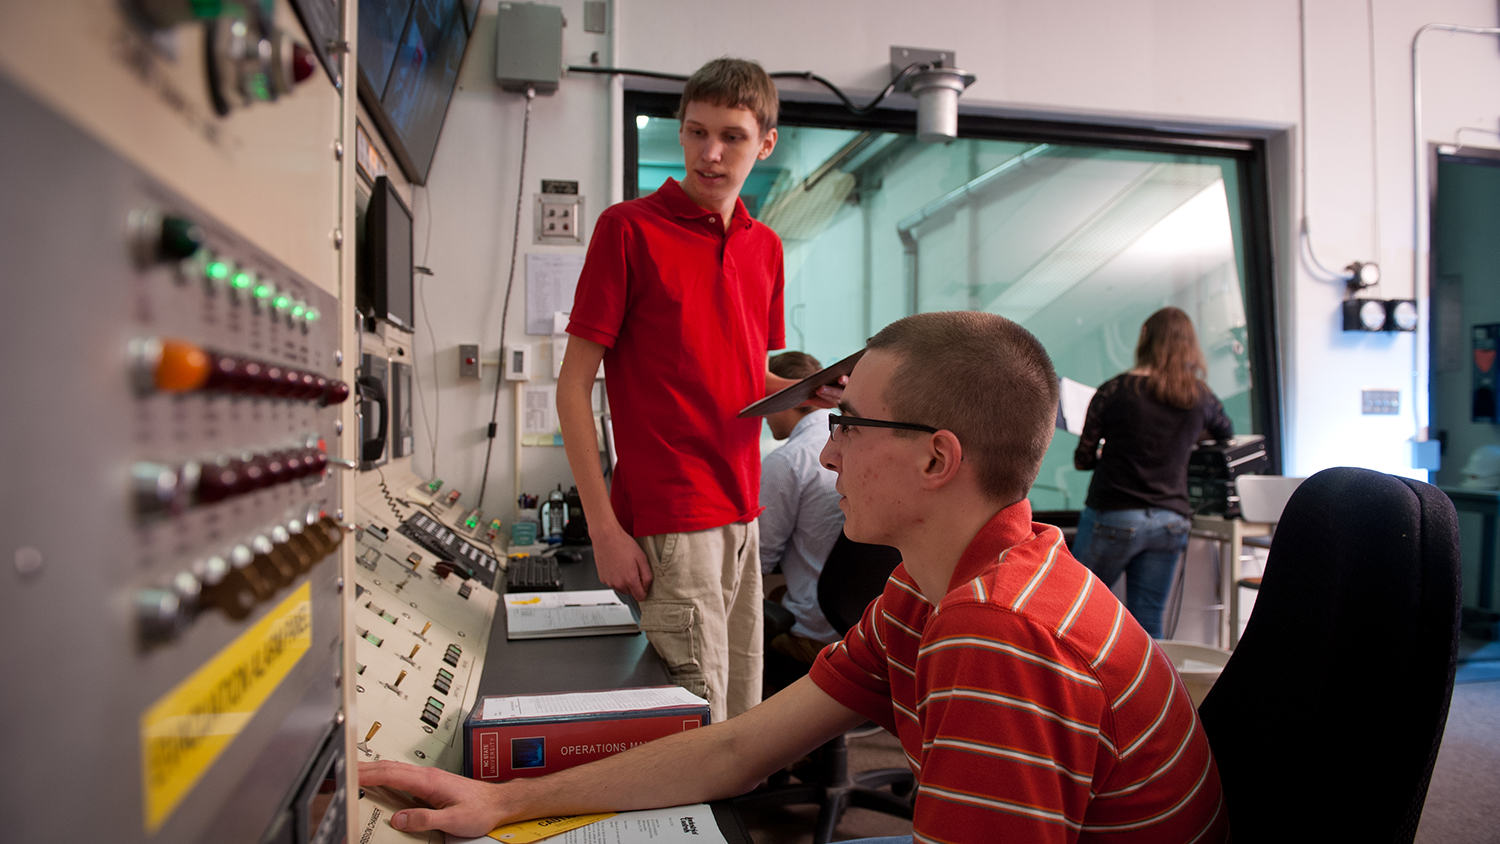 Students in reactor control booth.